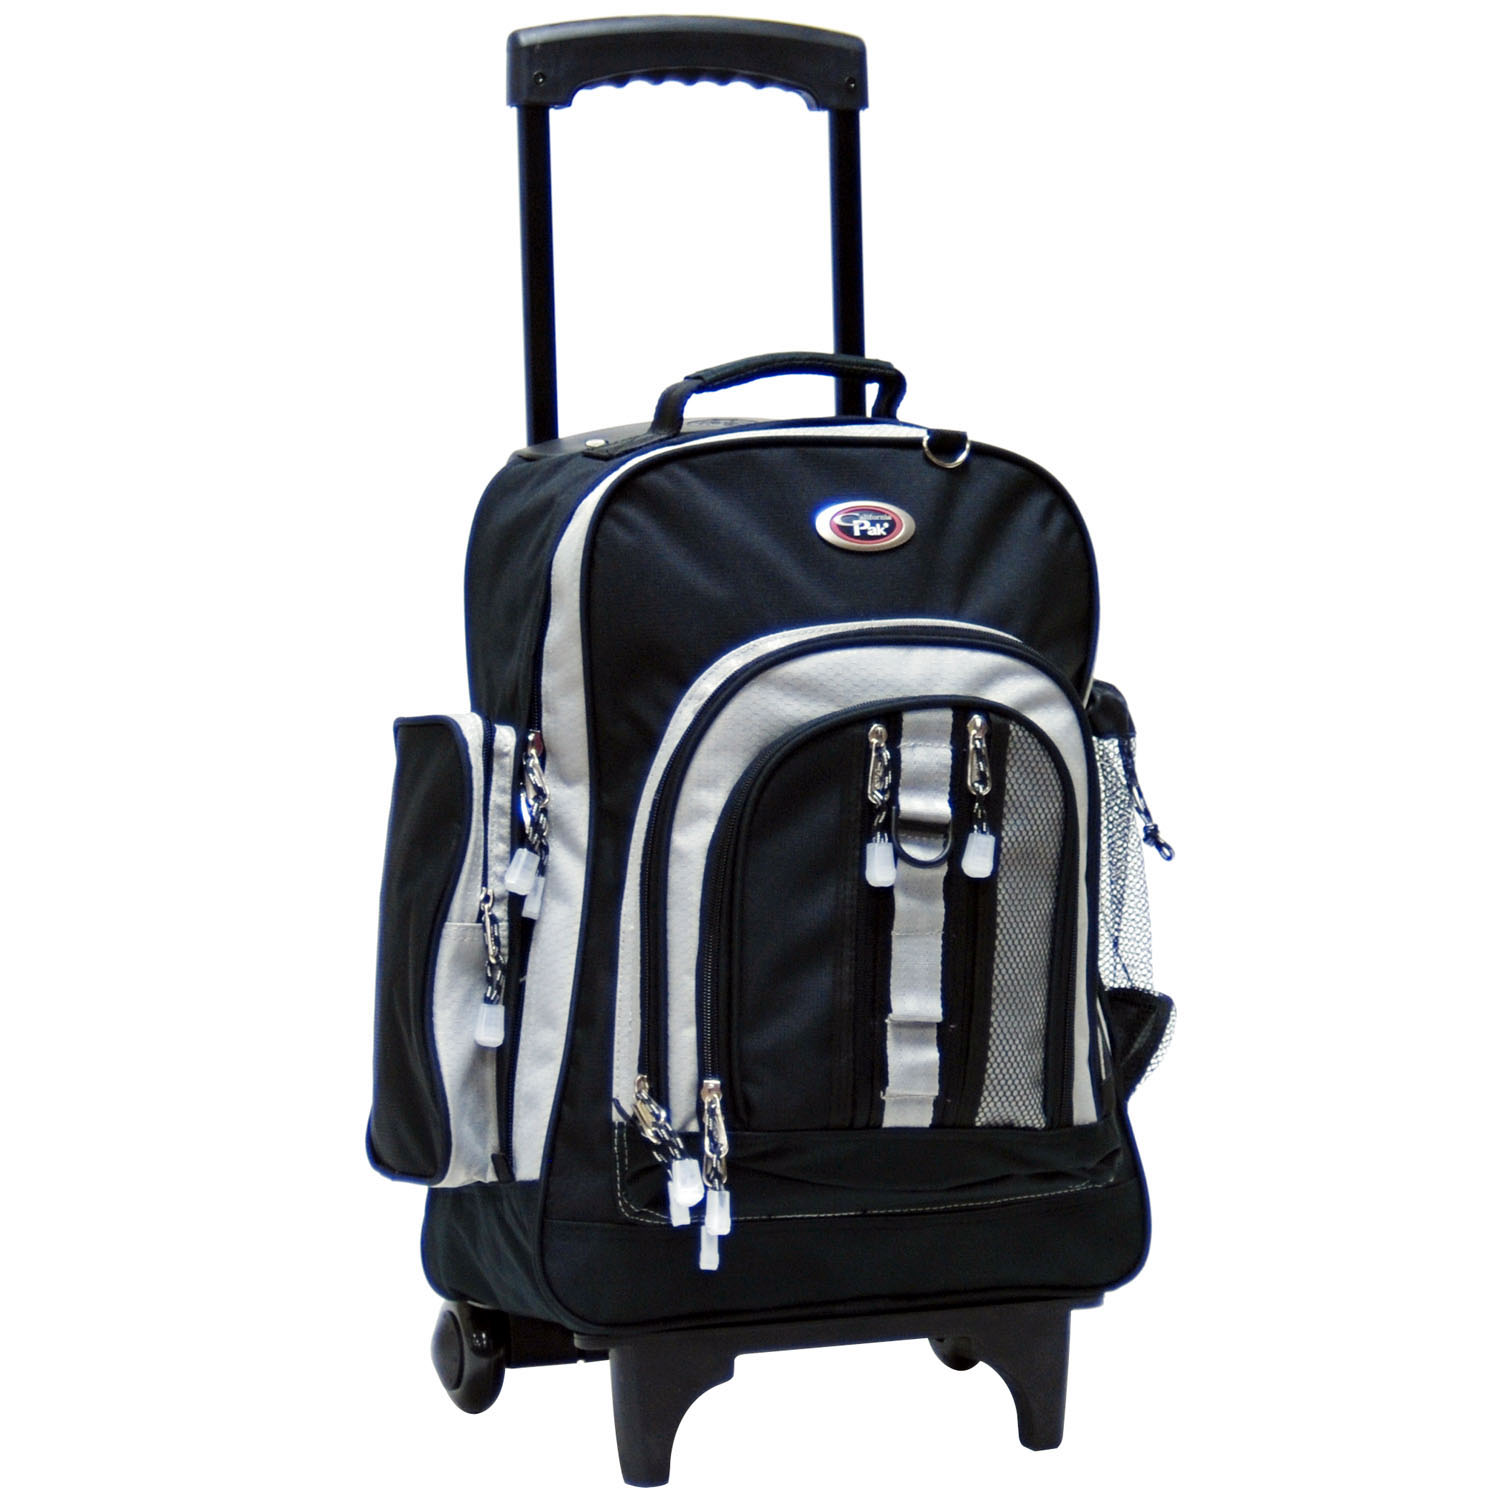 18" Rolling Backpack With Reflective Tape (Awestruck)